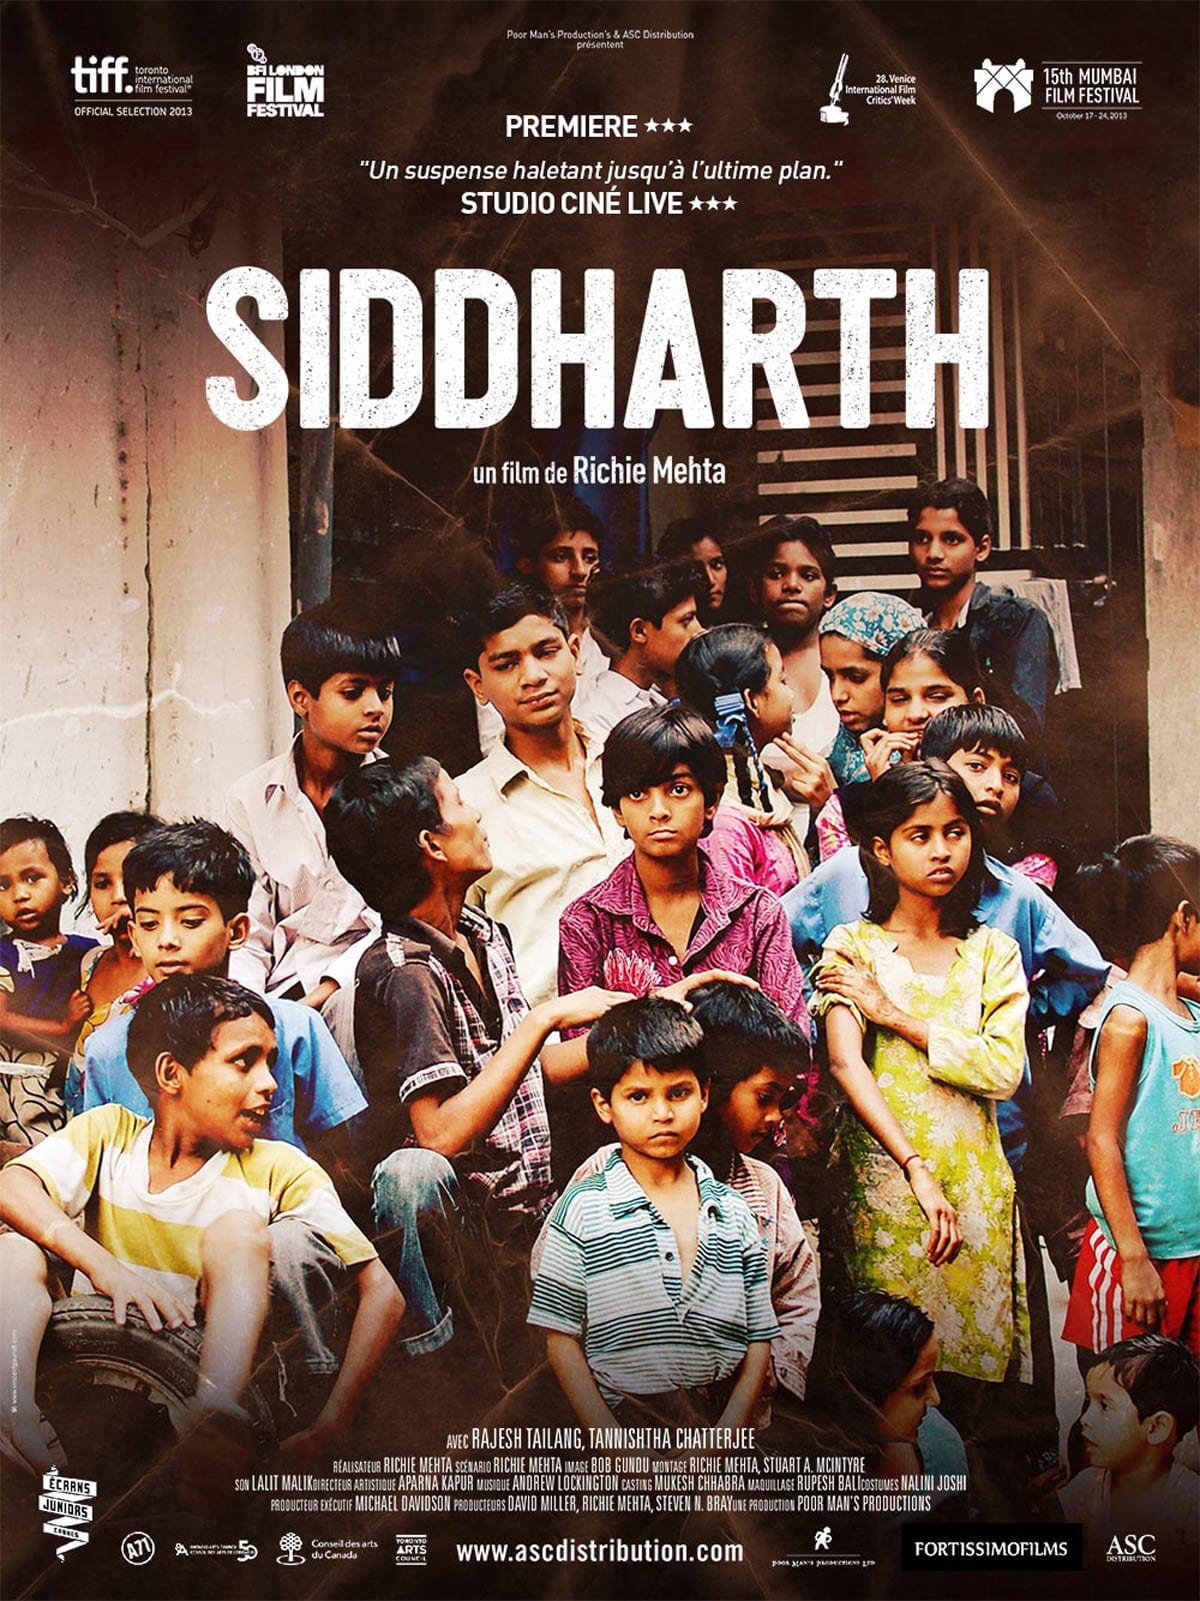 Poster for the movie "Siddharth"